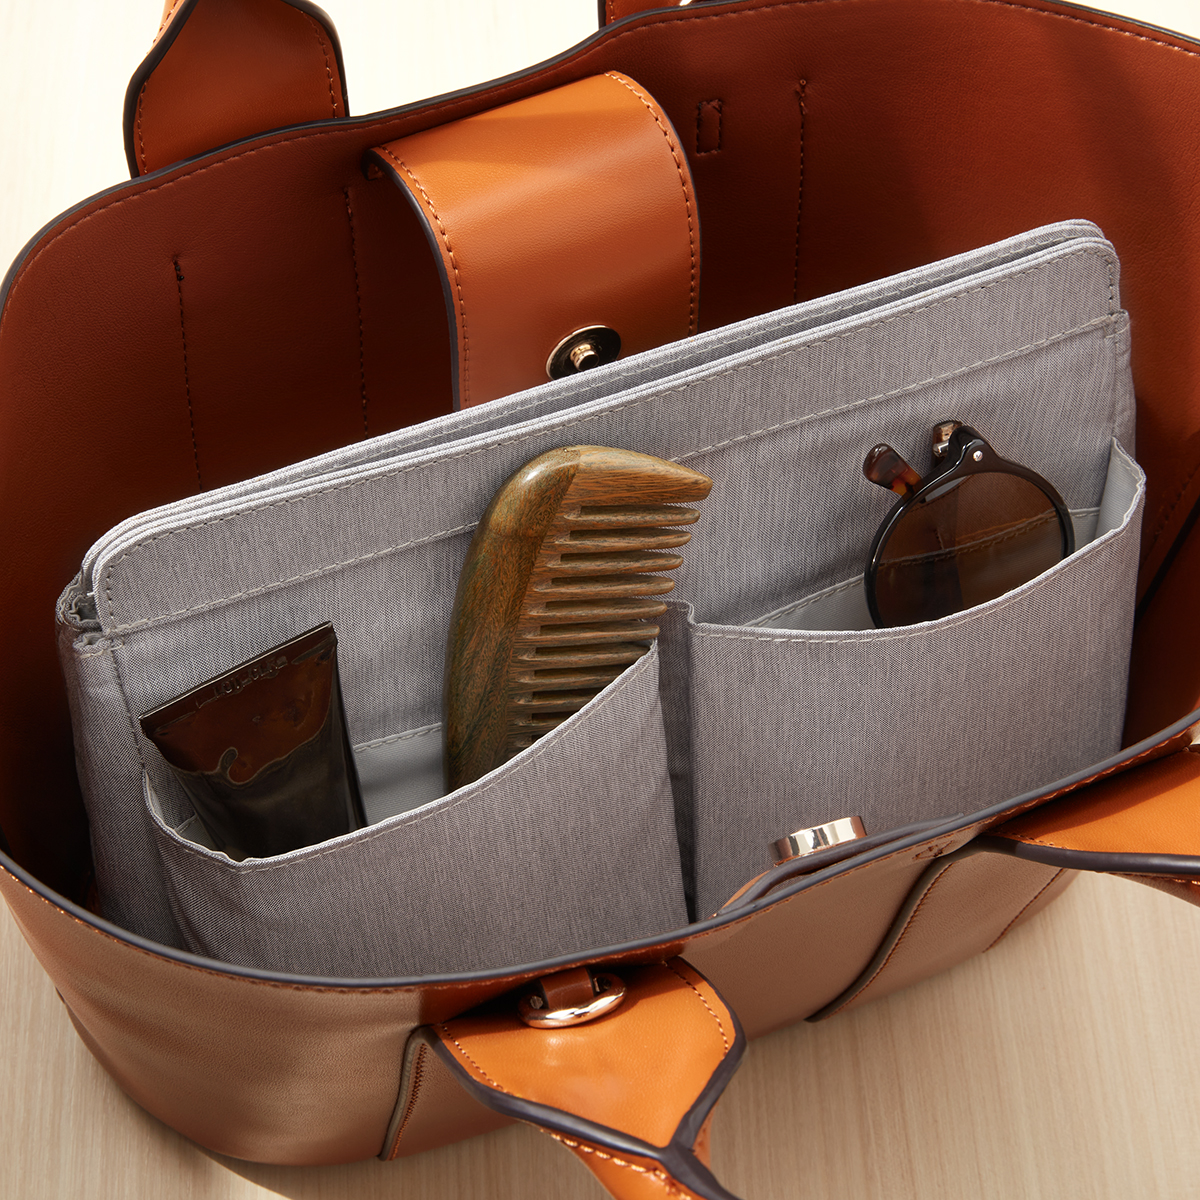 https://www.containerstore.com/catalogimages/477391/10091717-large-purse-organizer-env.jpg